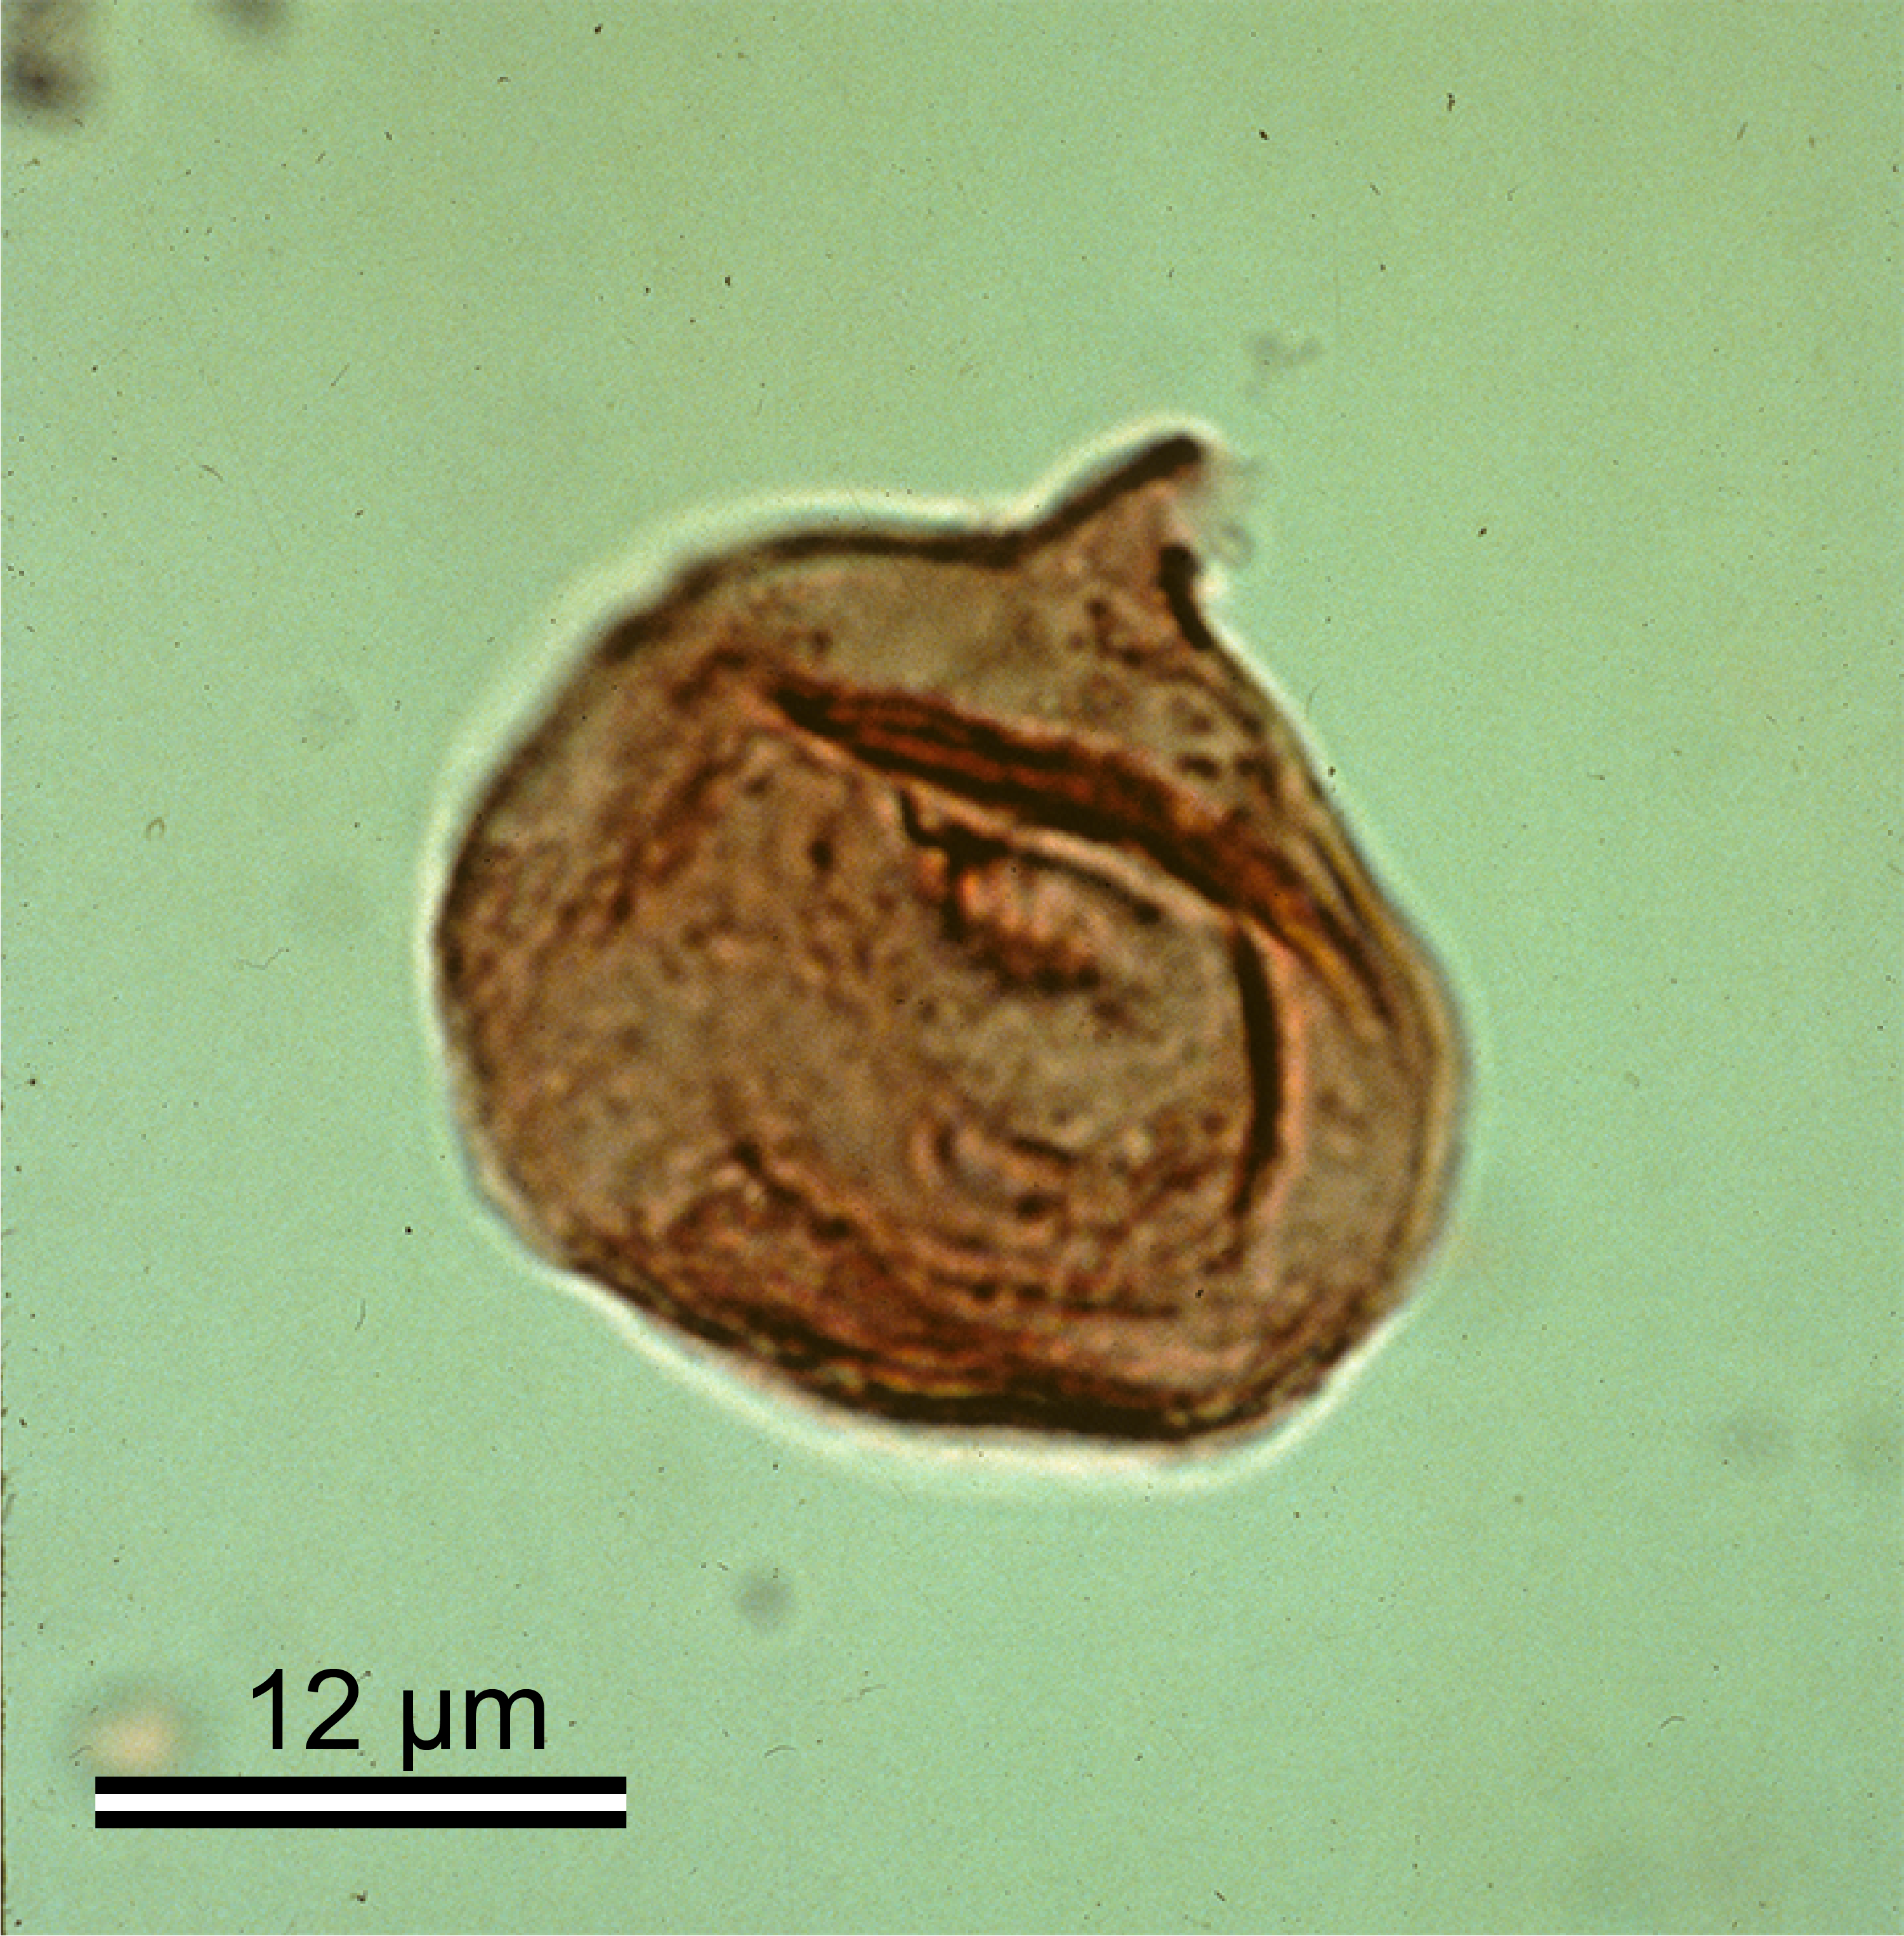 A single round pollen grain with a small pointed part on the top.